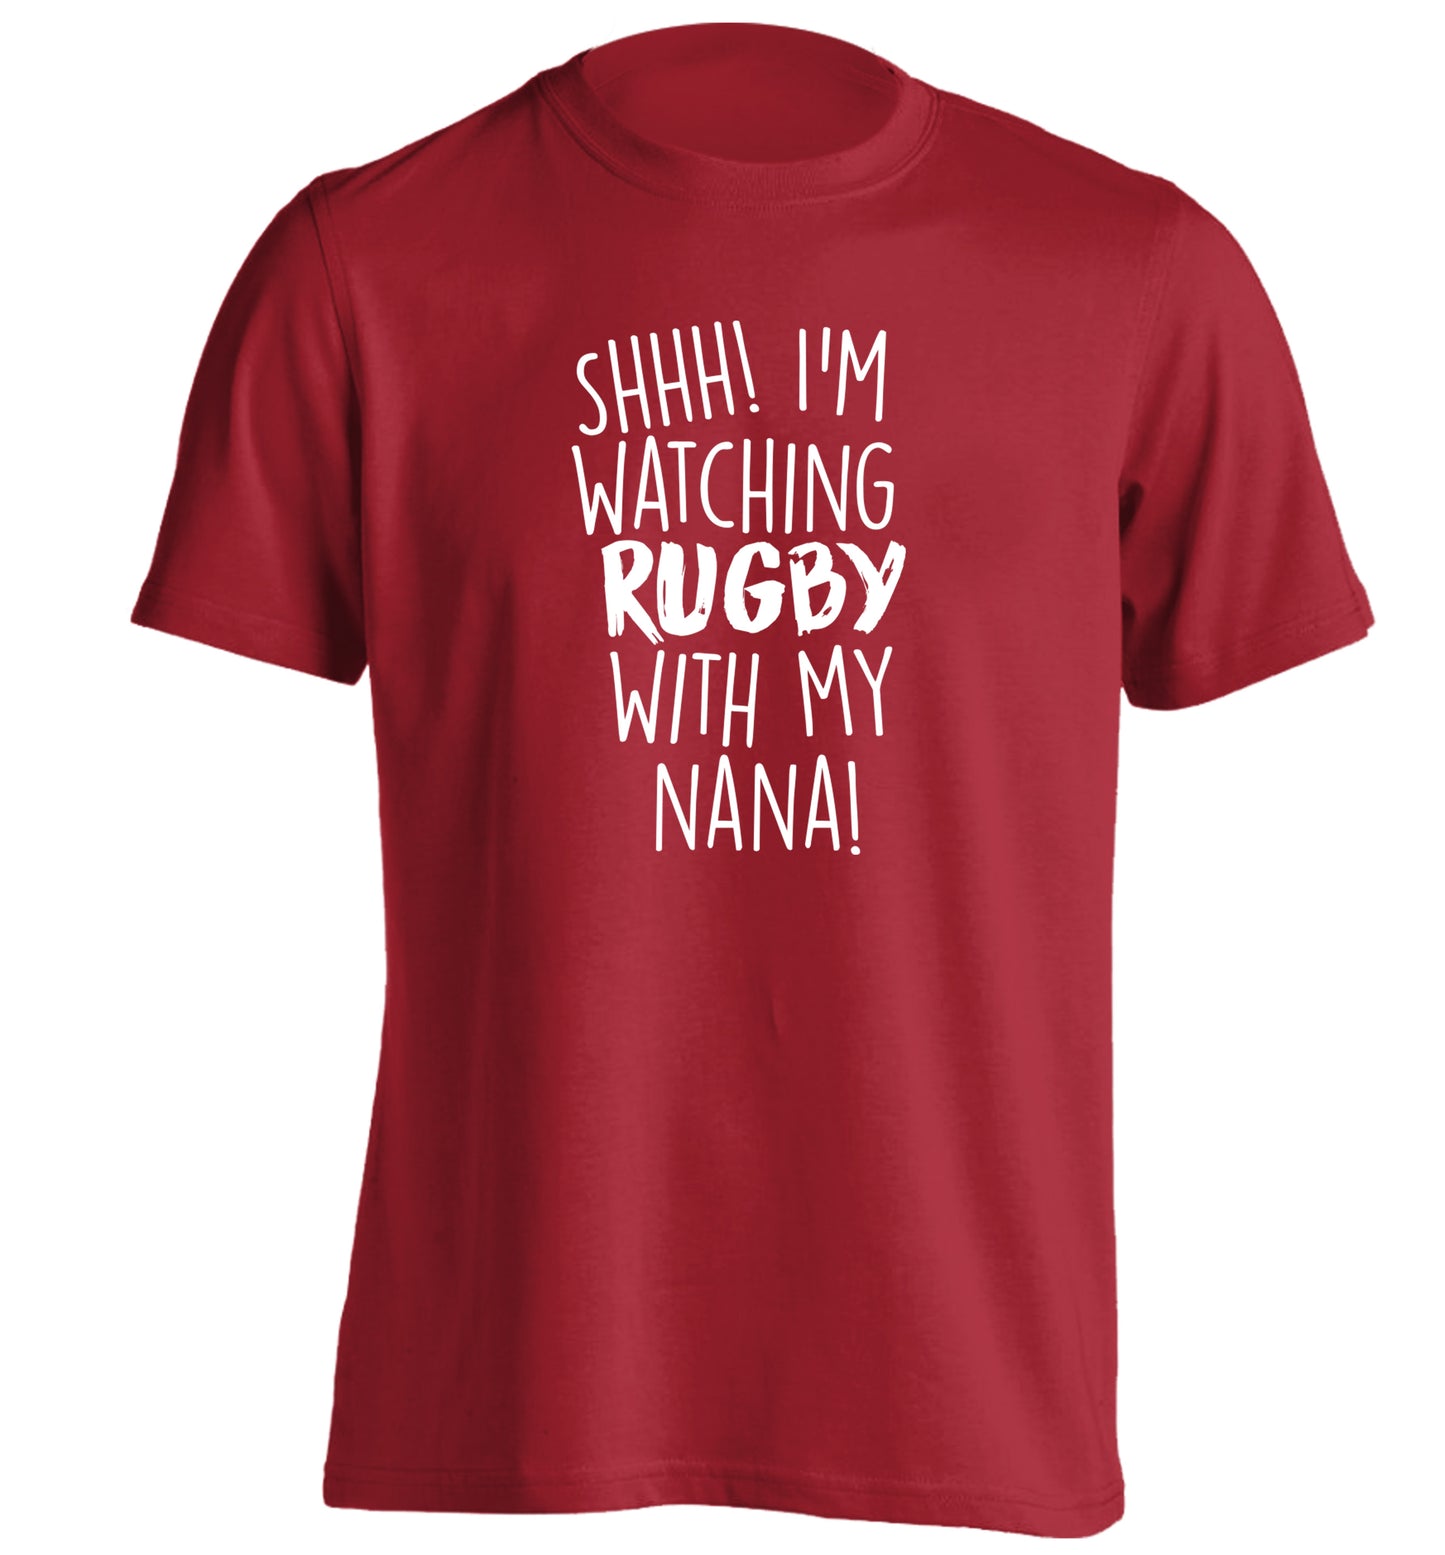 Shh I'm watching rugby with my nana adults unisex red Tshirt 2XL